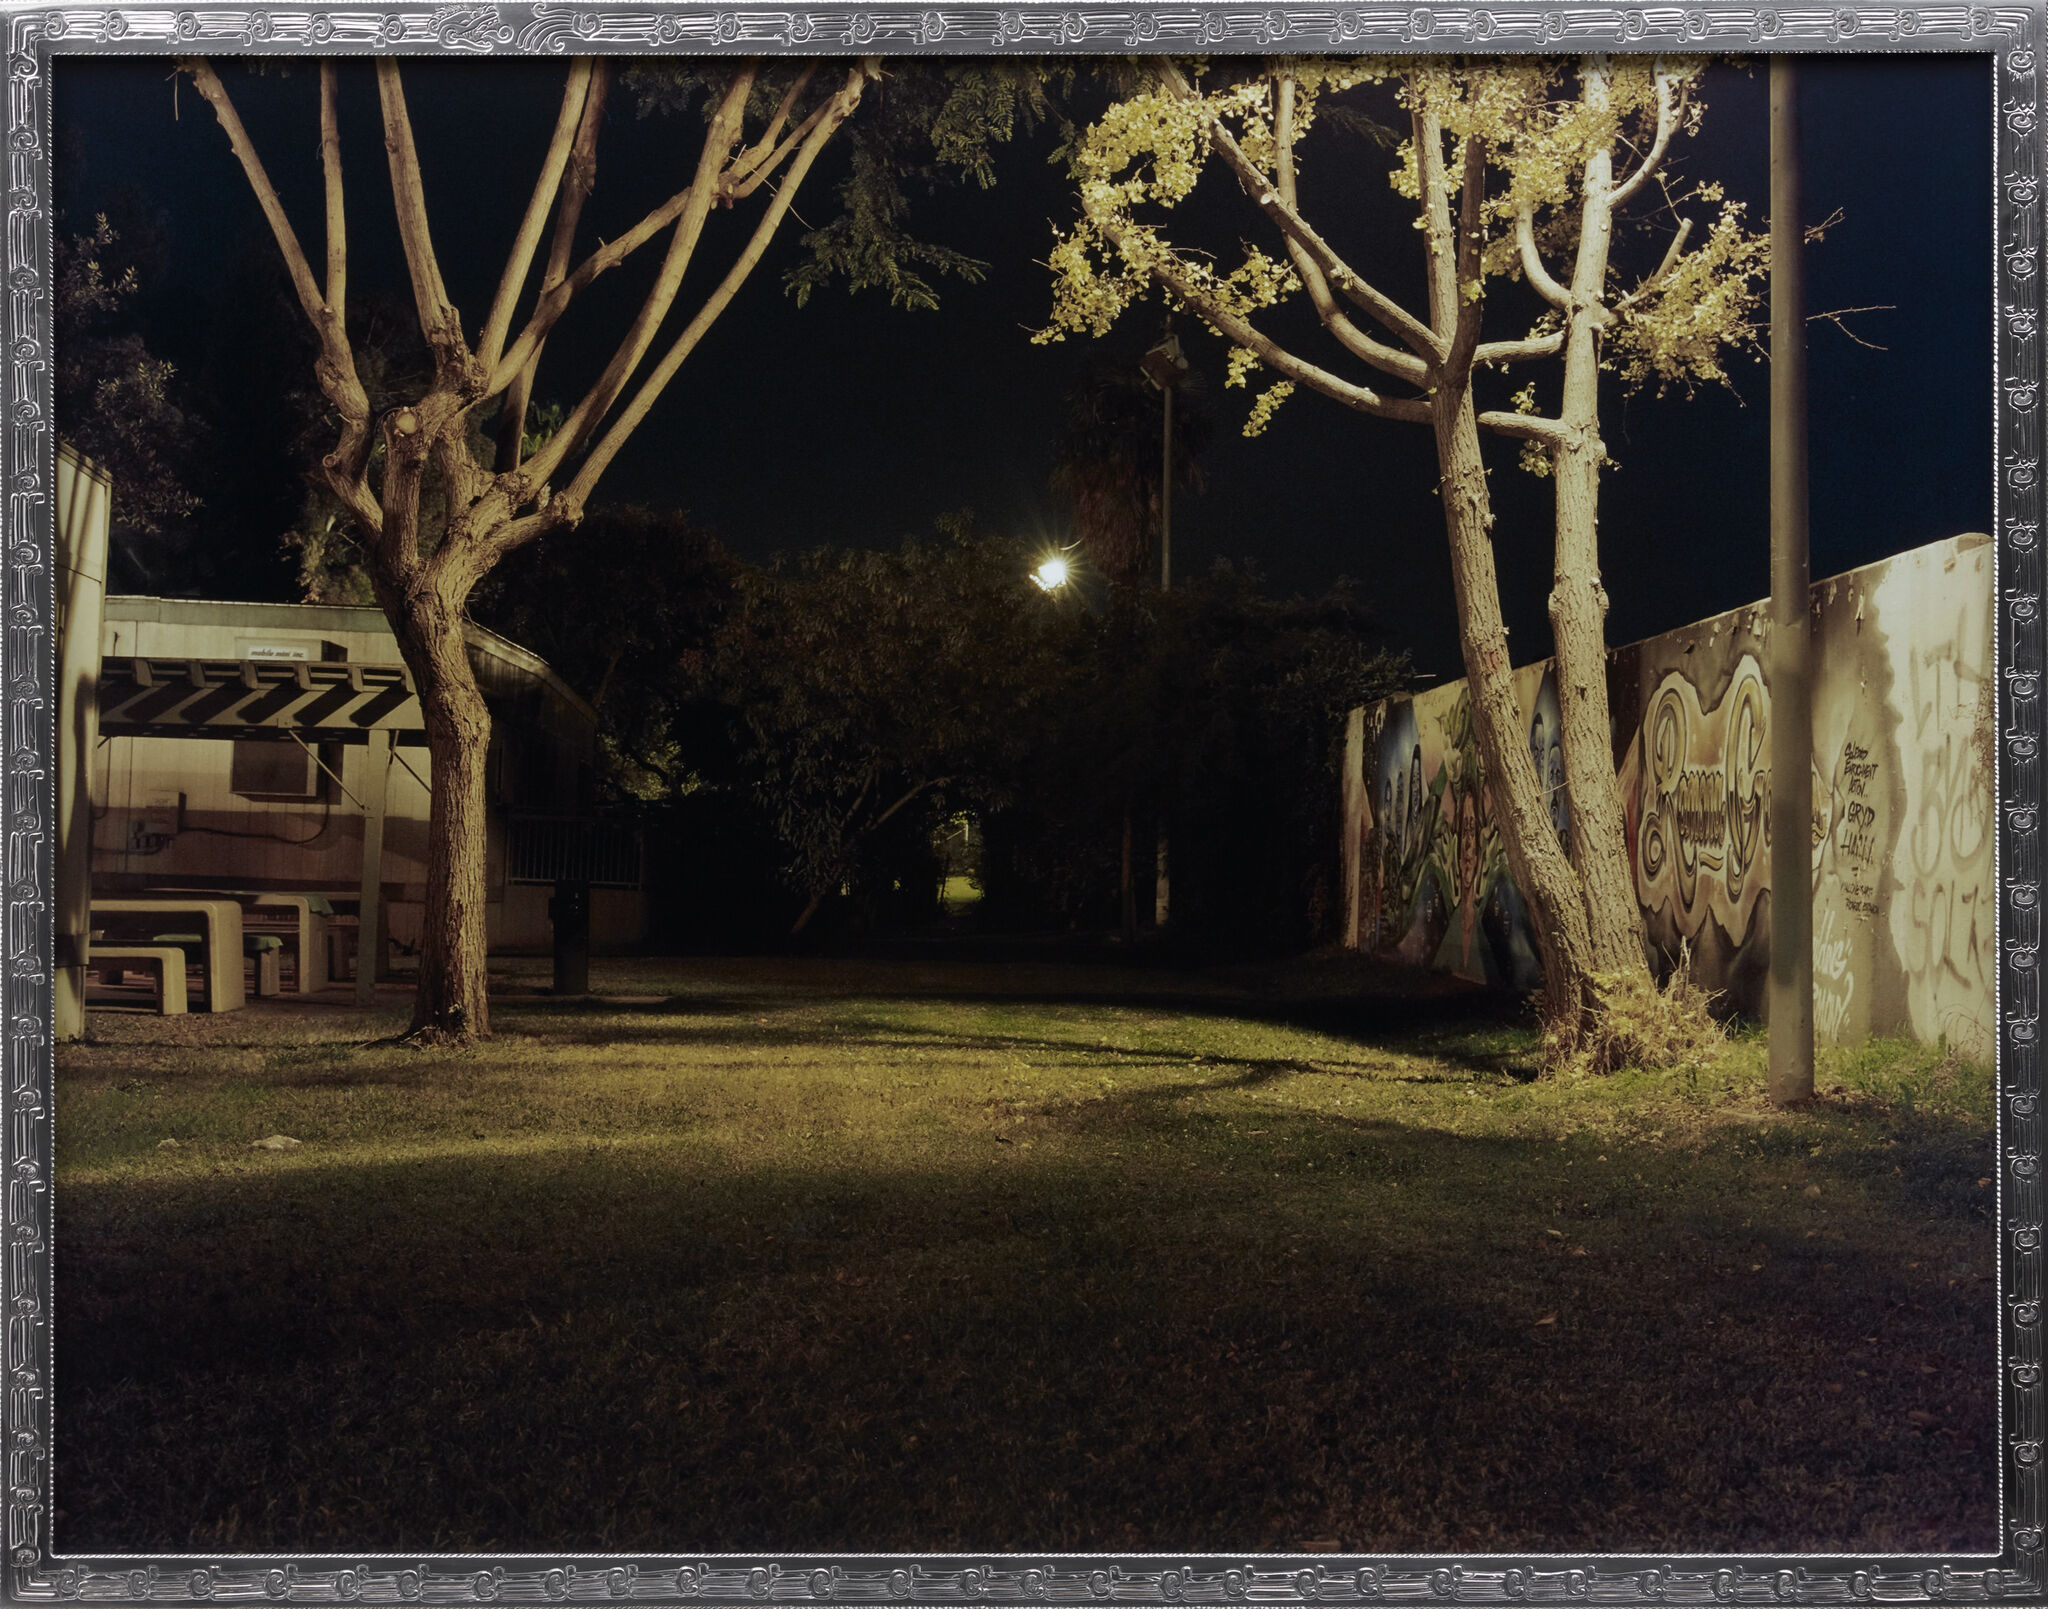 Nighttime image of a grassy yard with two trees and a graffiti-covered wall.